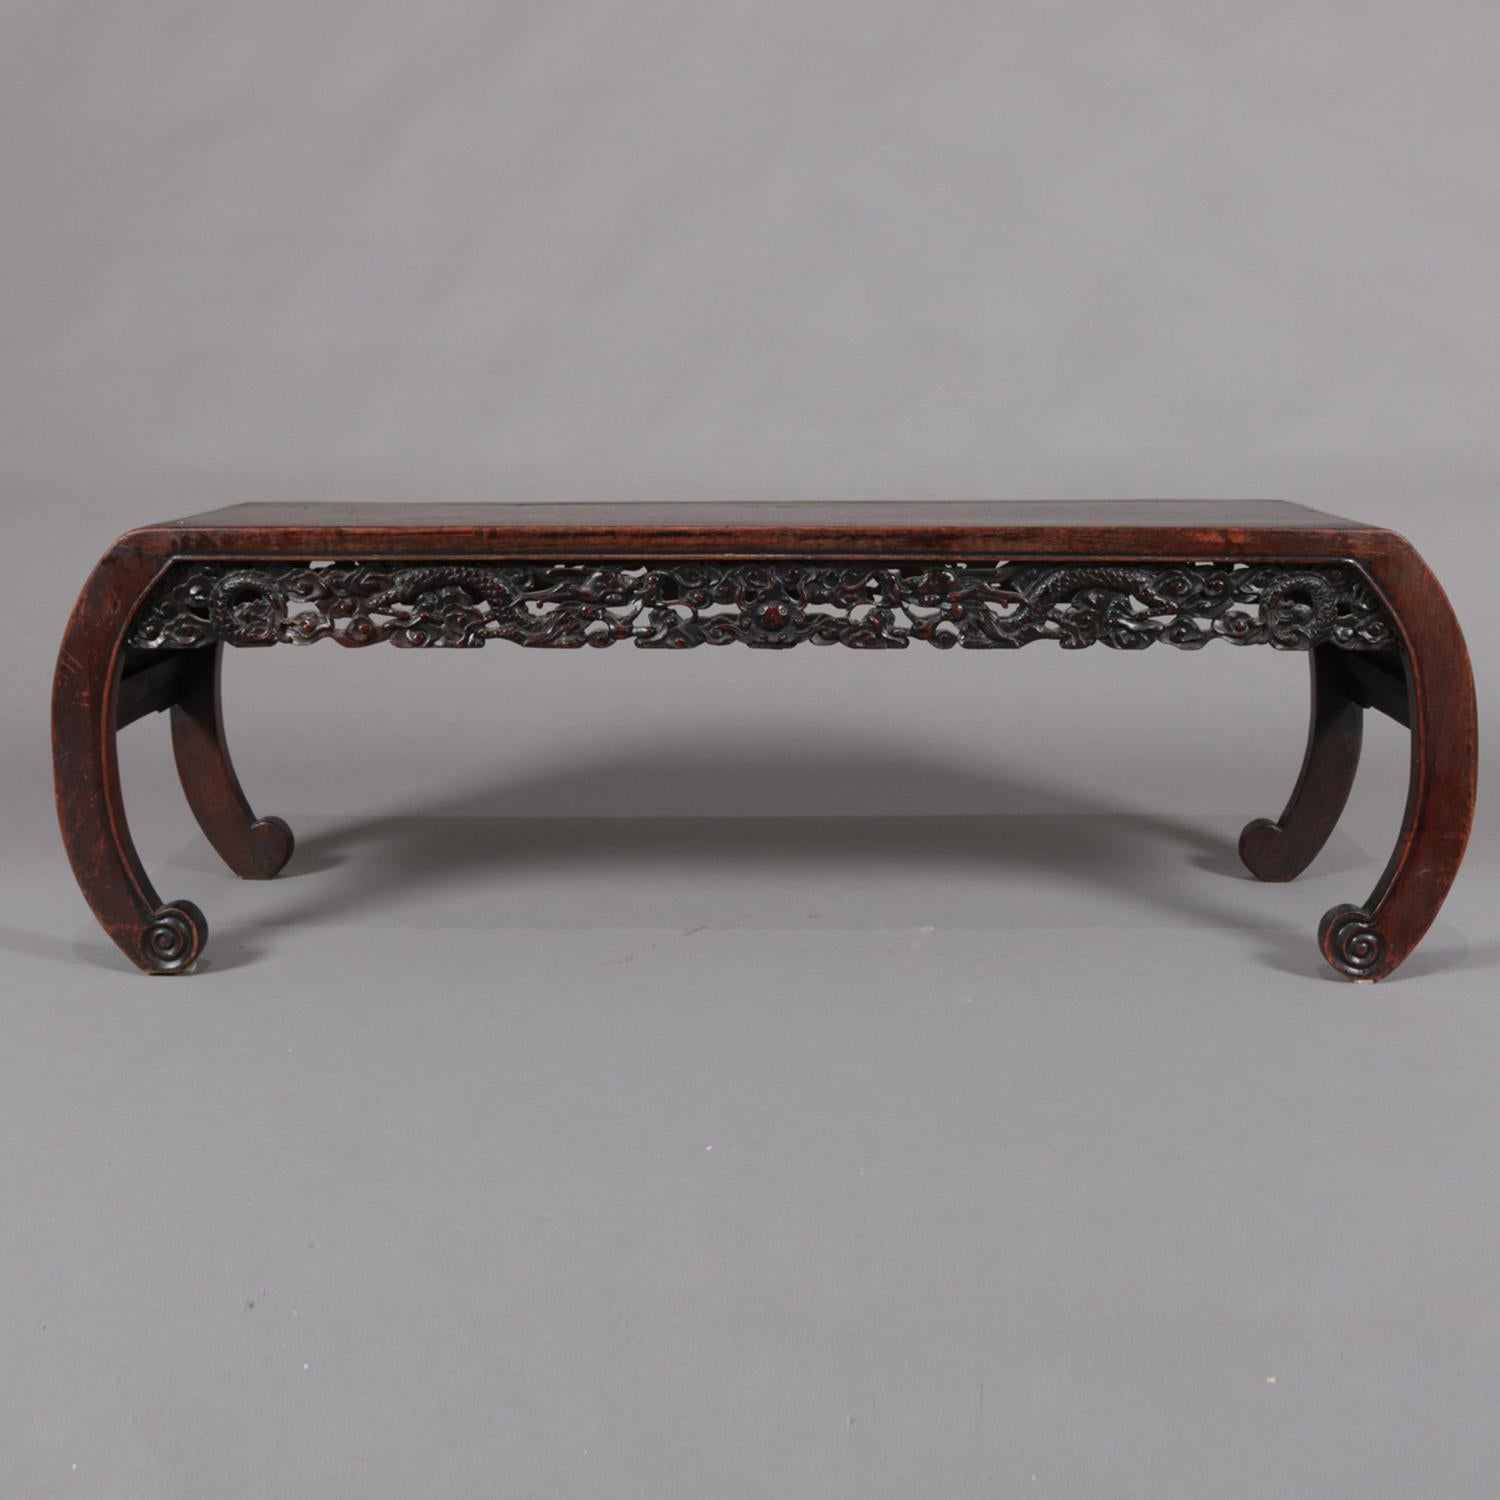 Antique Chinese figural low table features hardwood construction with rectangular top over carved and pierced apron having dragon and foliate design, raised on scroll form legs with paneled sides and scrolled horse hoof feet, 20th